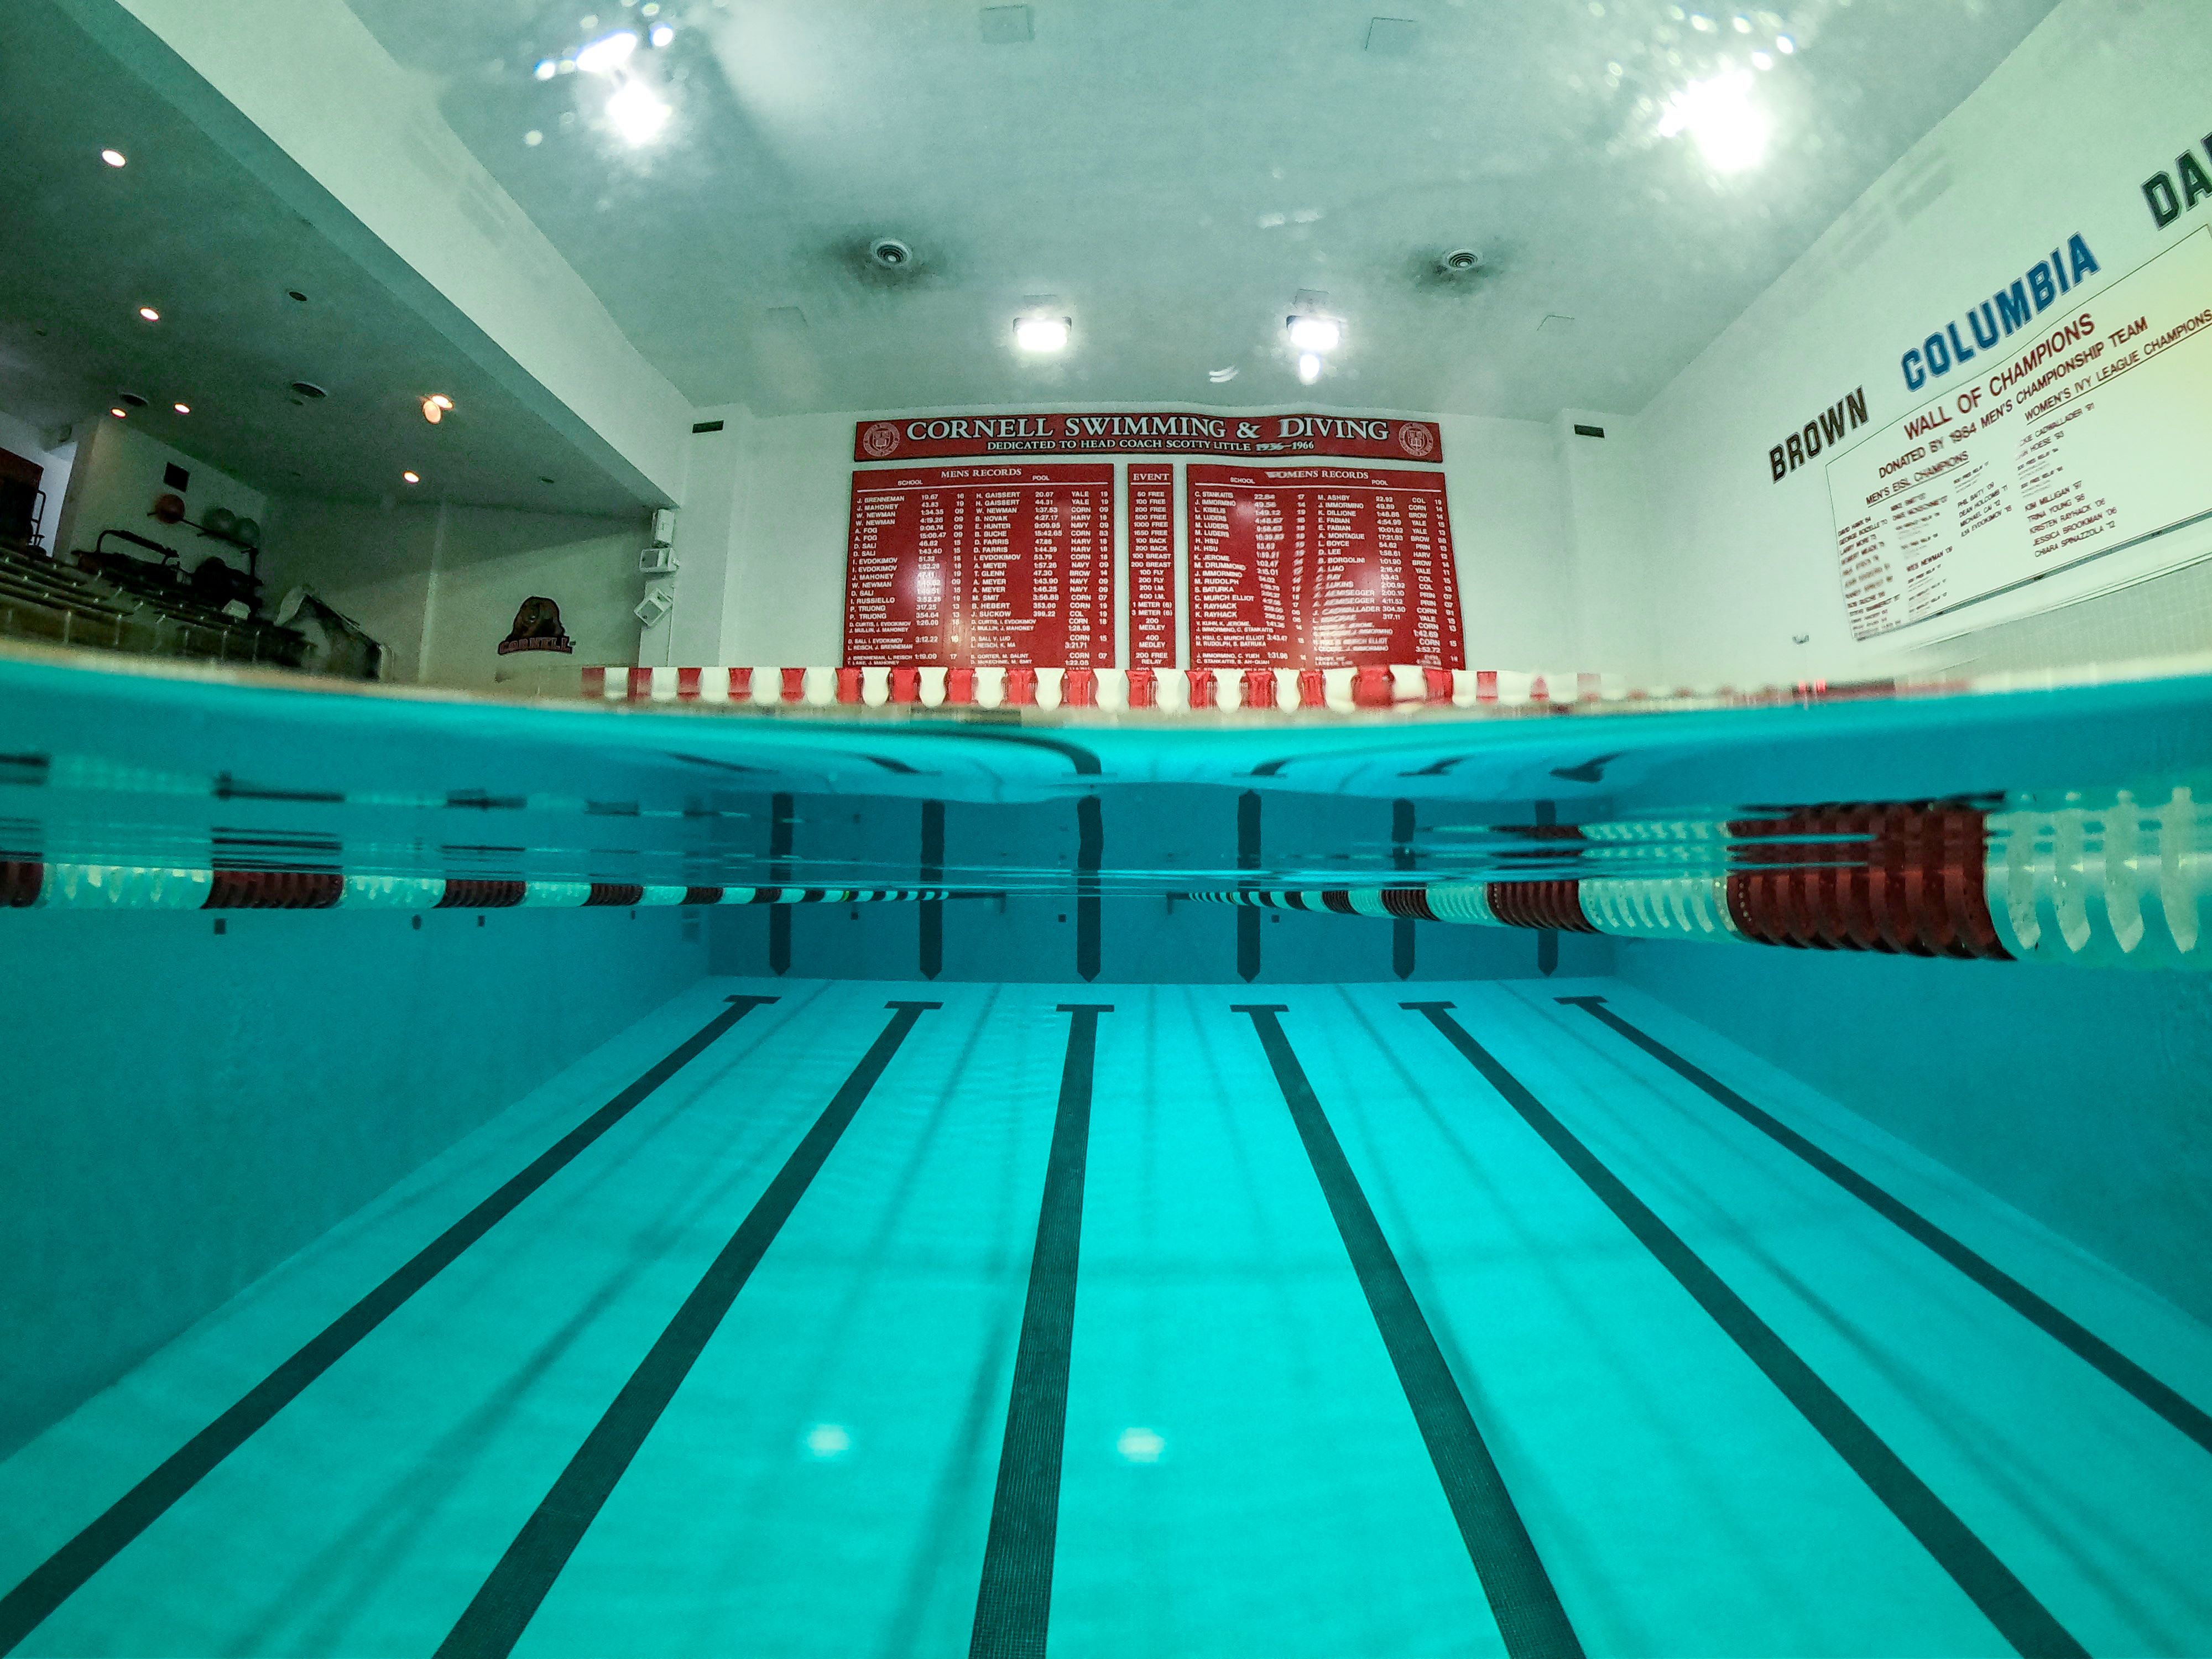 Teagle pool from deep end looking at record board